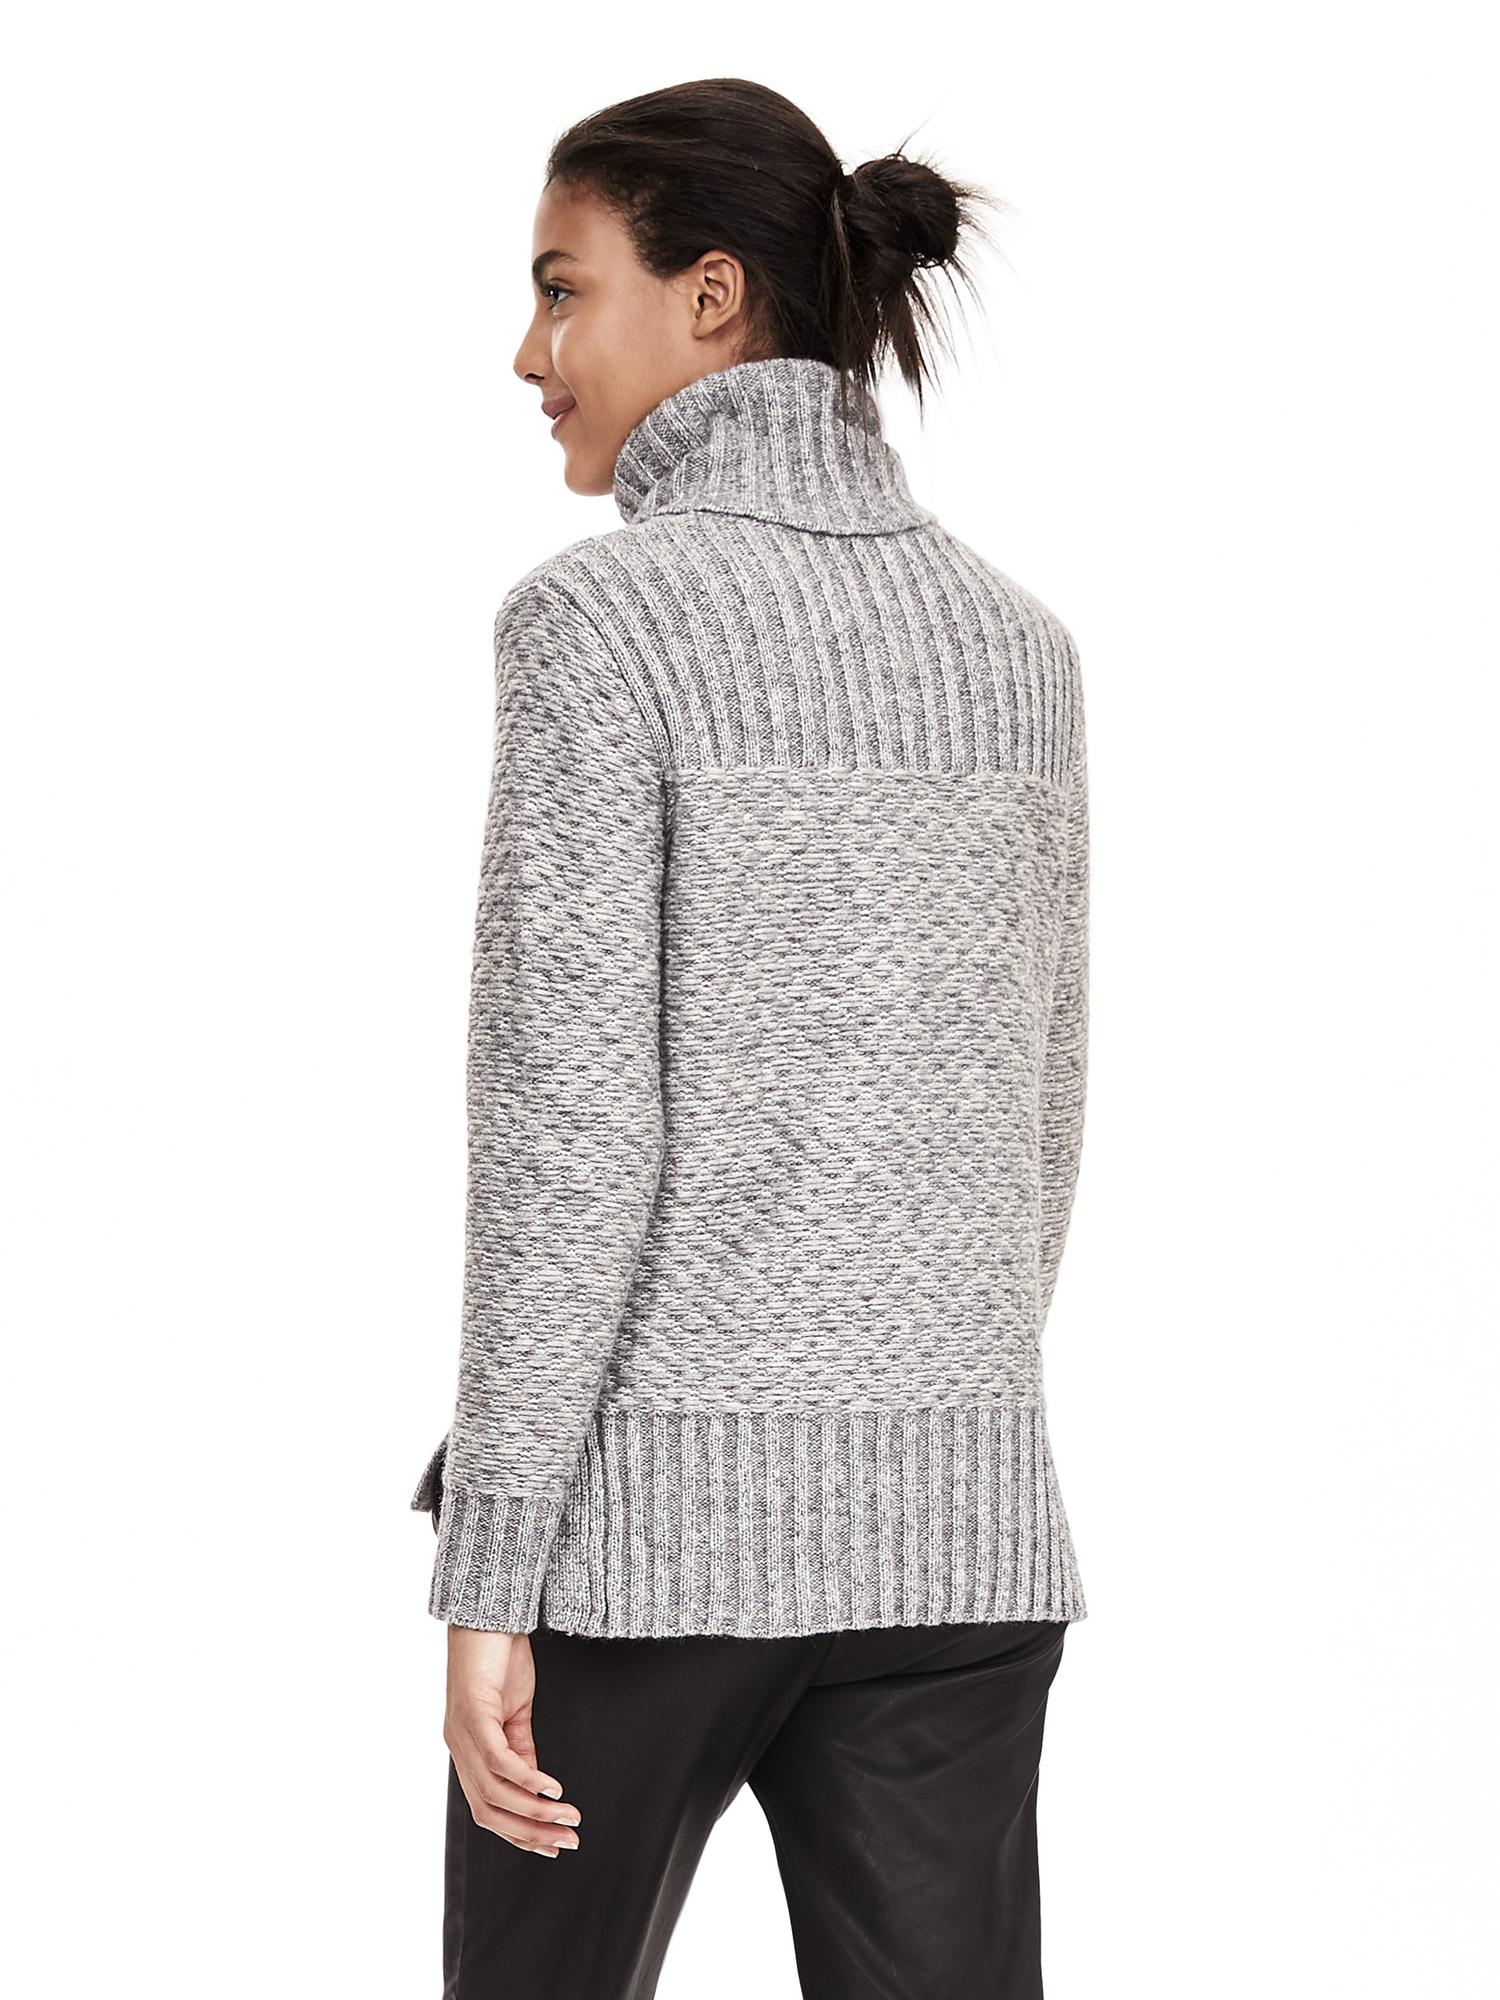 Two-Tone High/Low Turtleneck Pullover